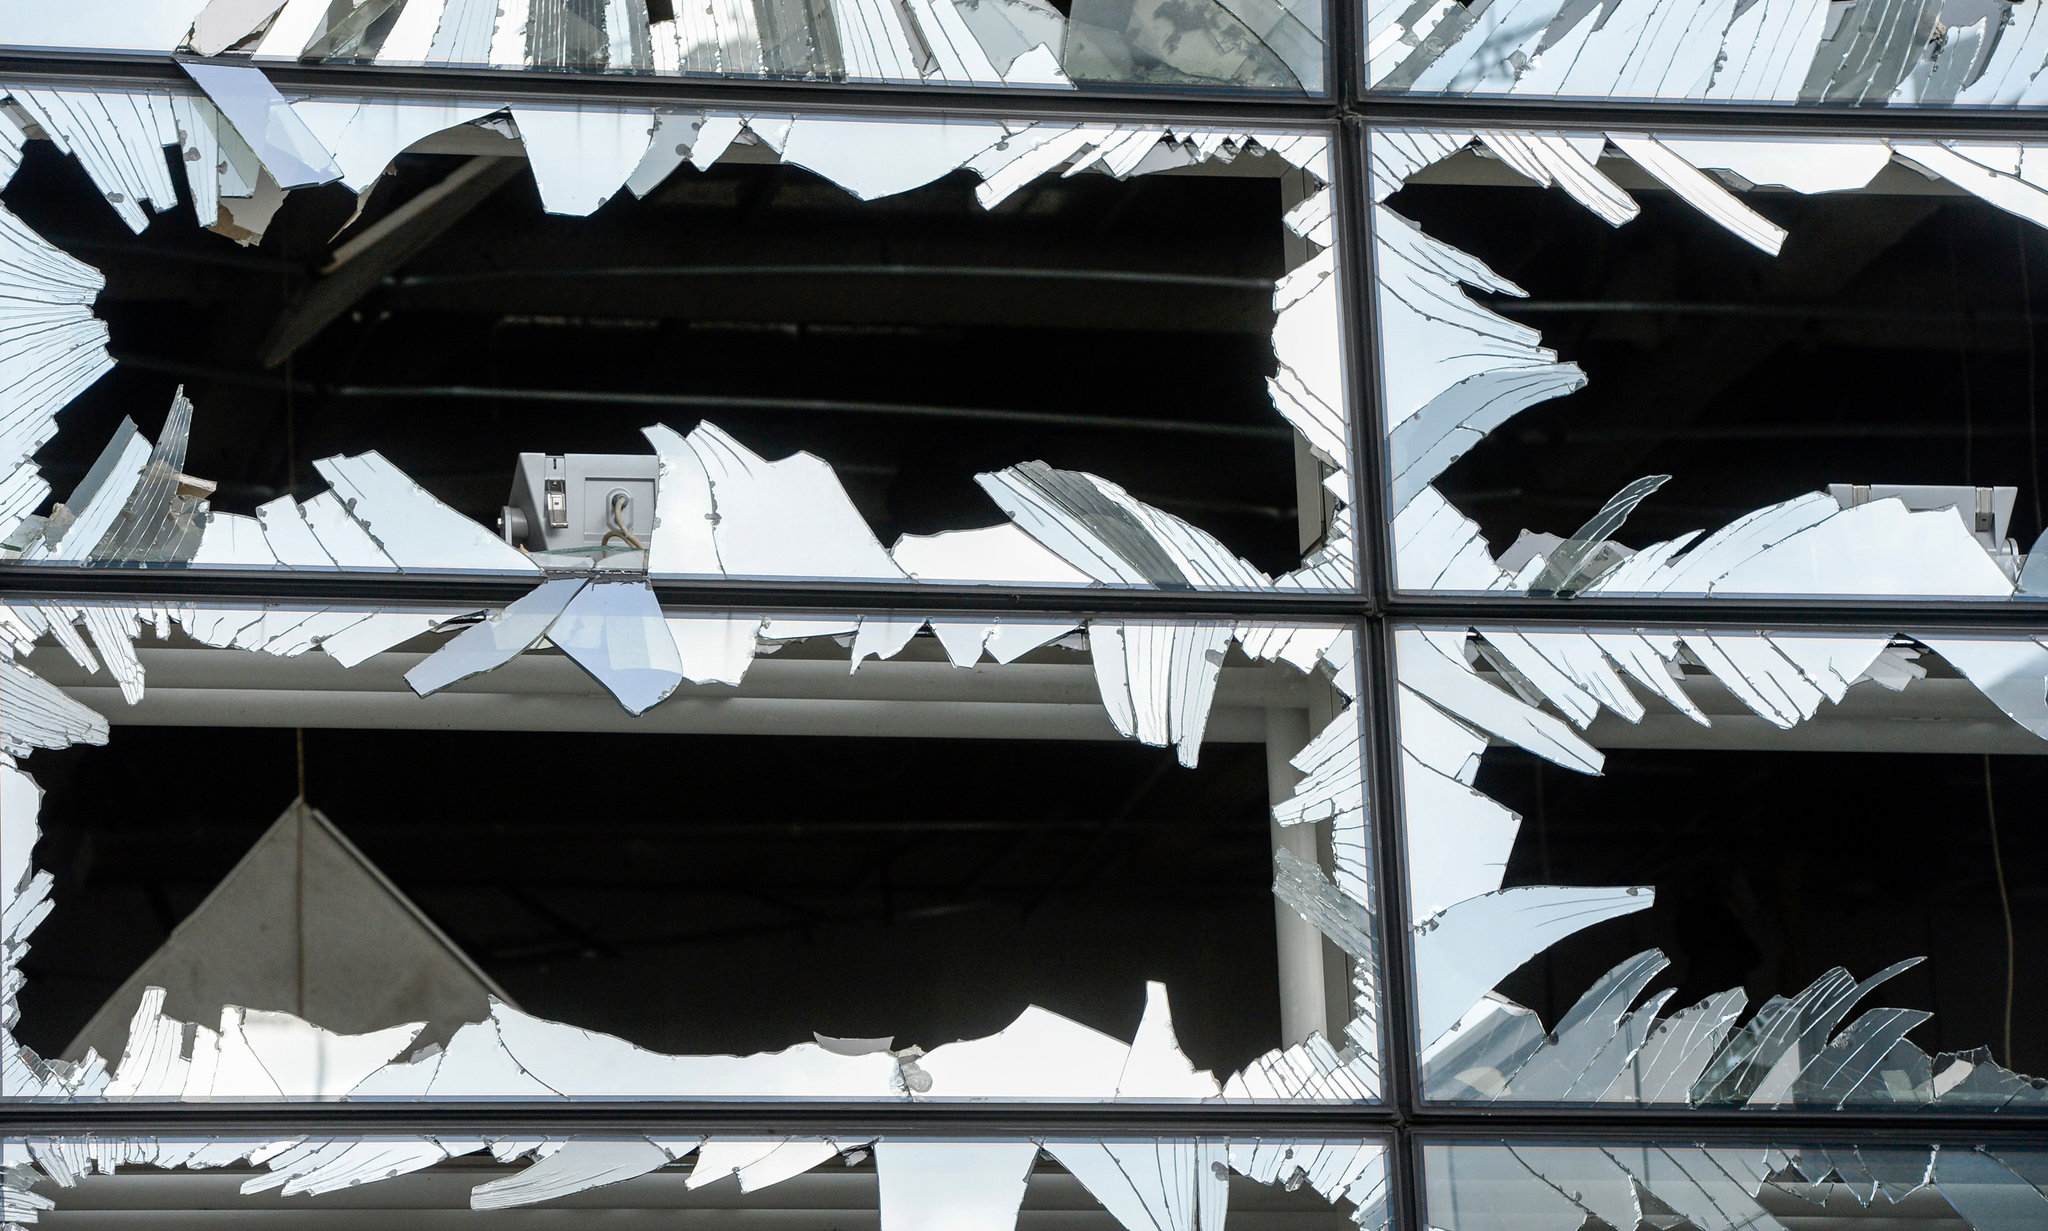 Windows at Brussels Airport after suicide bombings on Tuesday. Credit Pool photo by Frederic Sierakowski